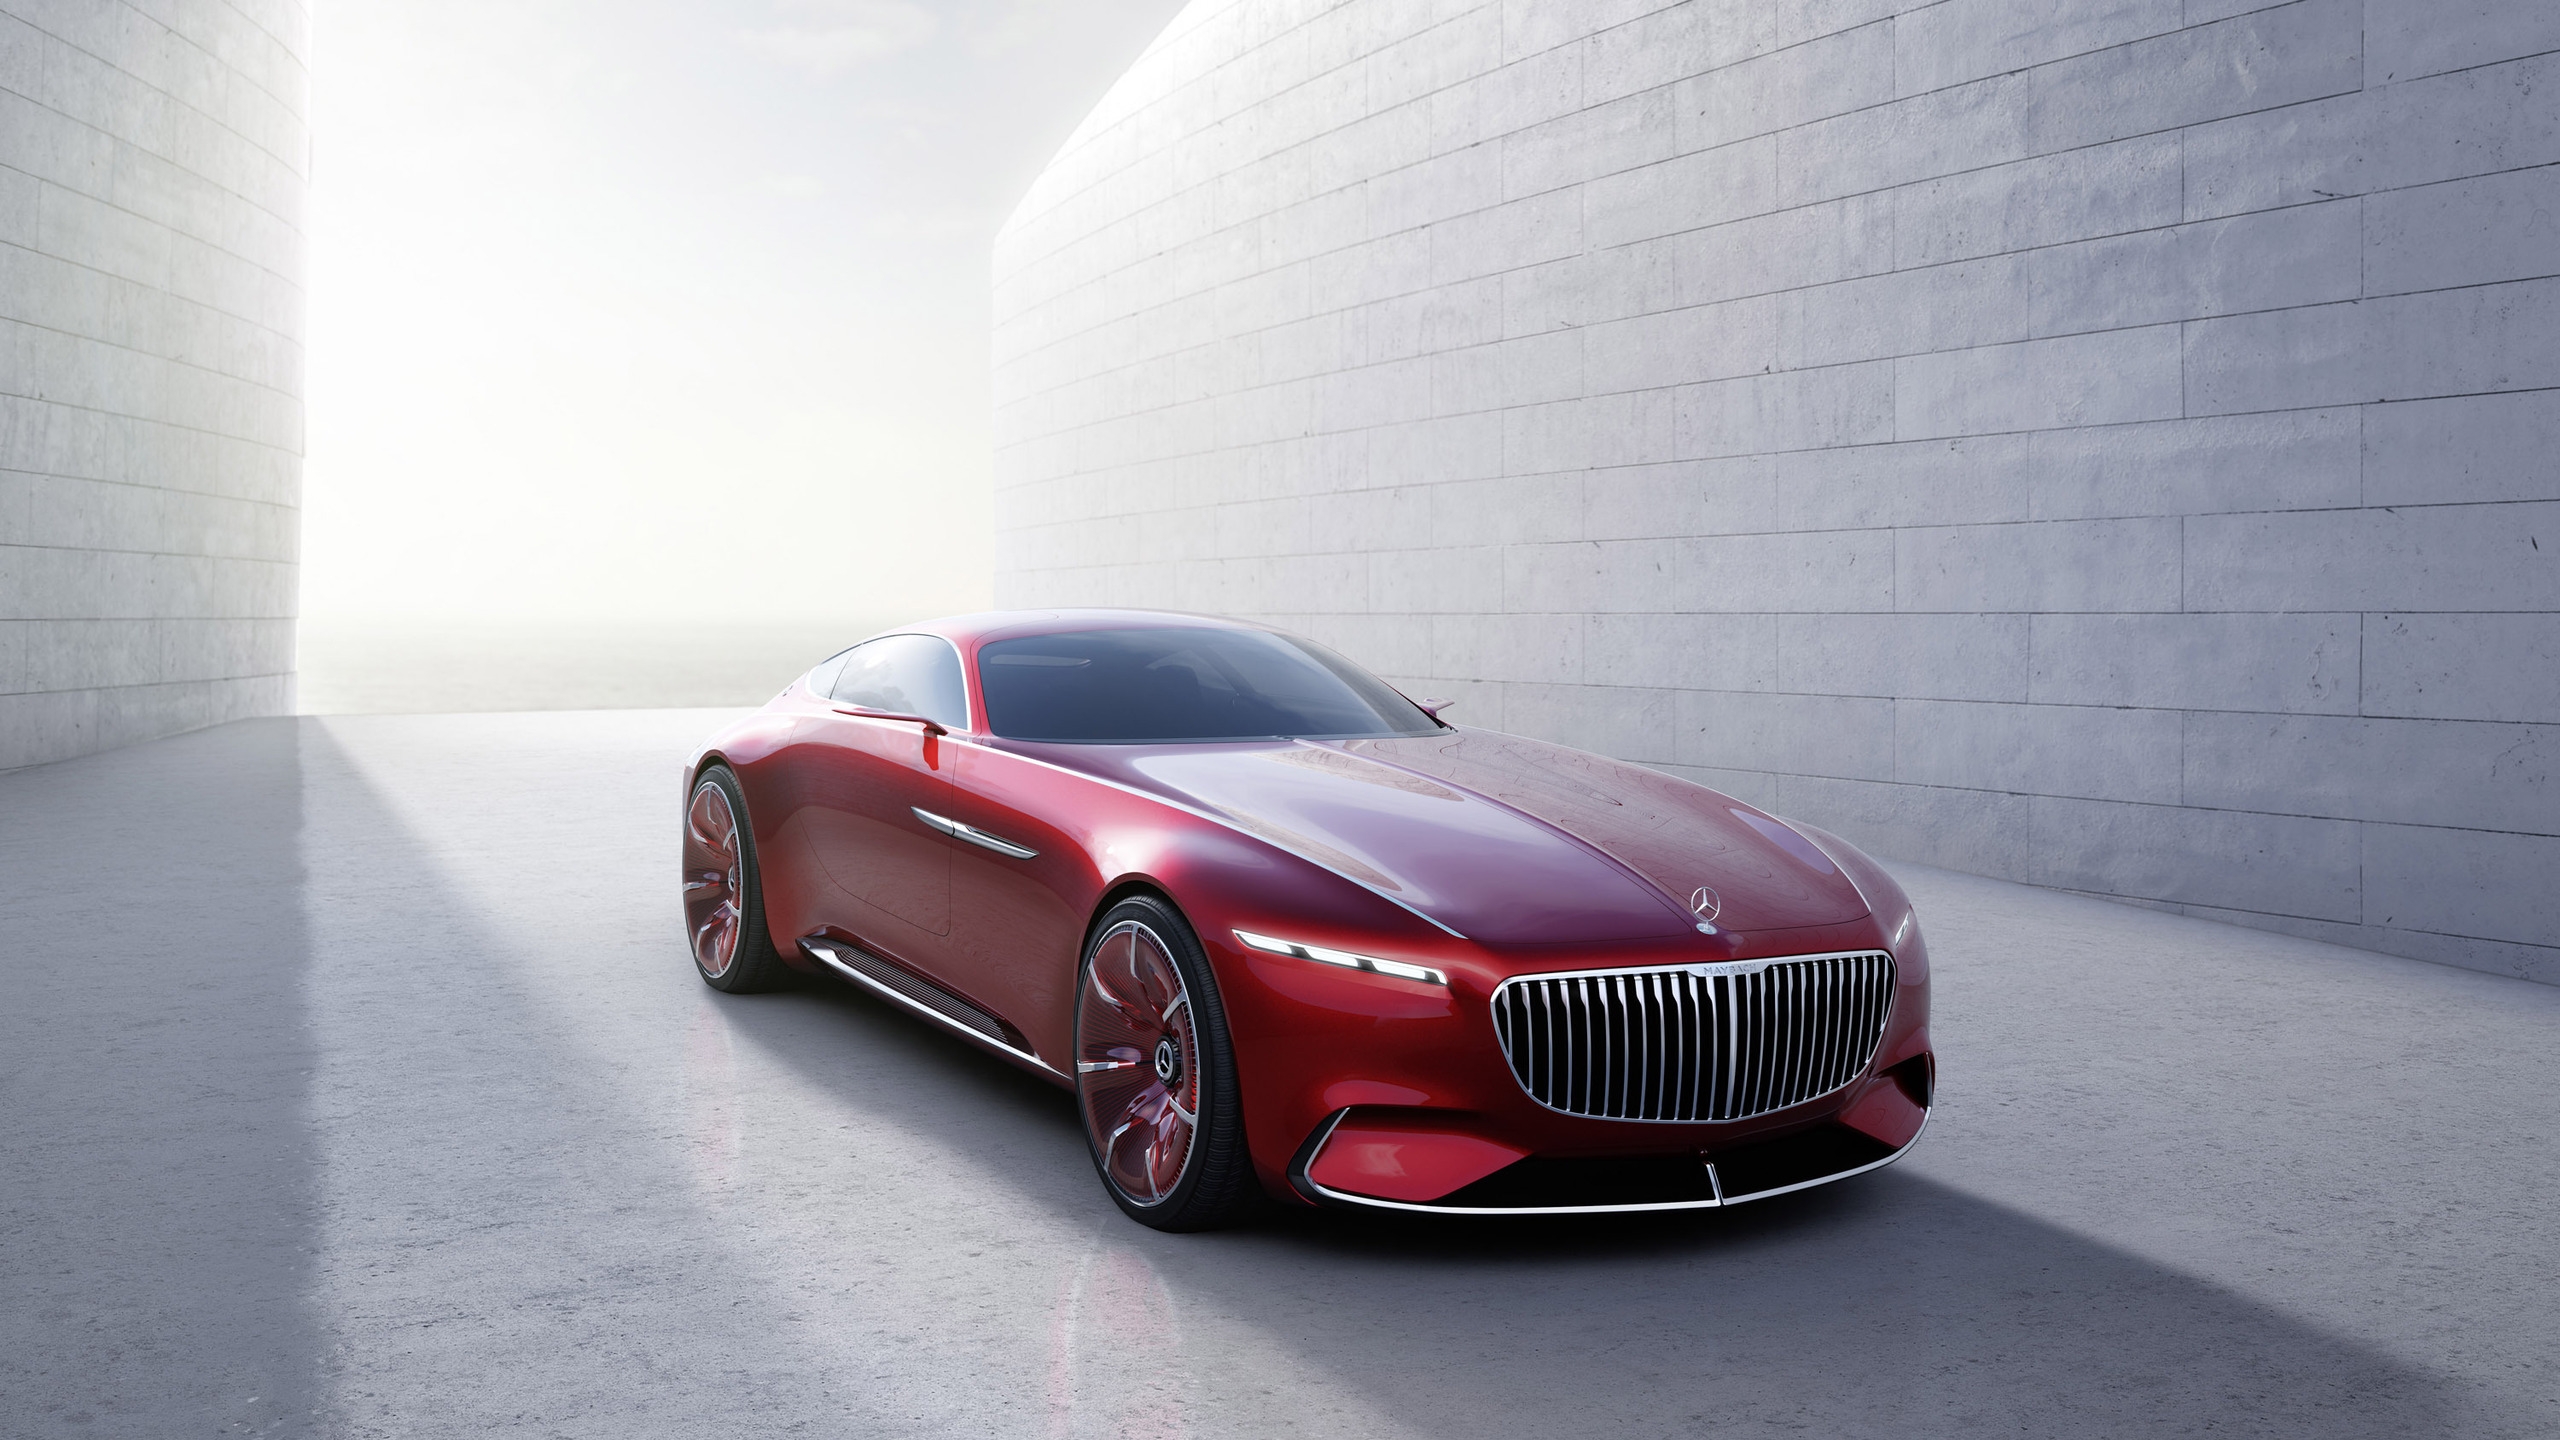 Maybach 6 2016 Concept Car for 2560x1440 HDTV resolution